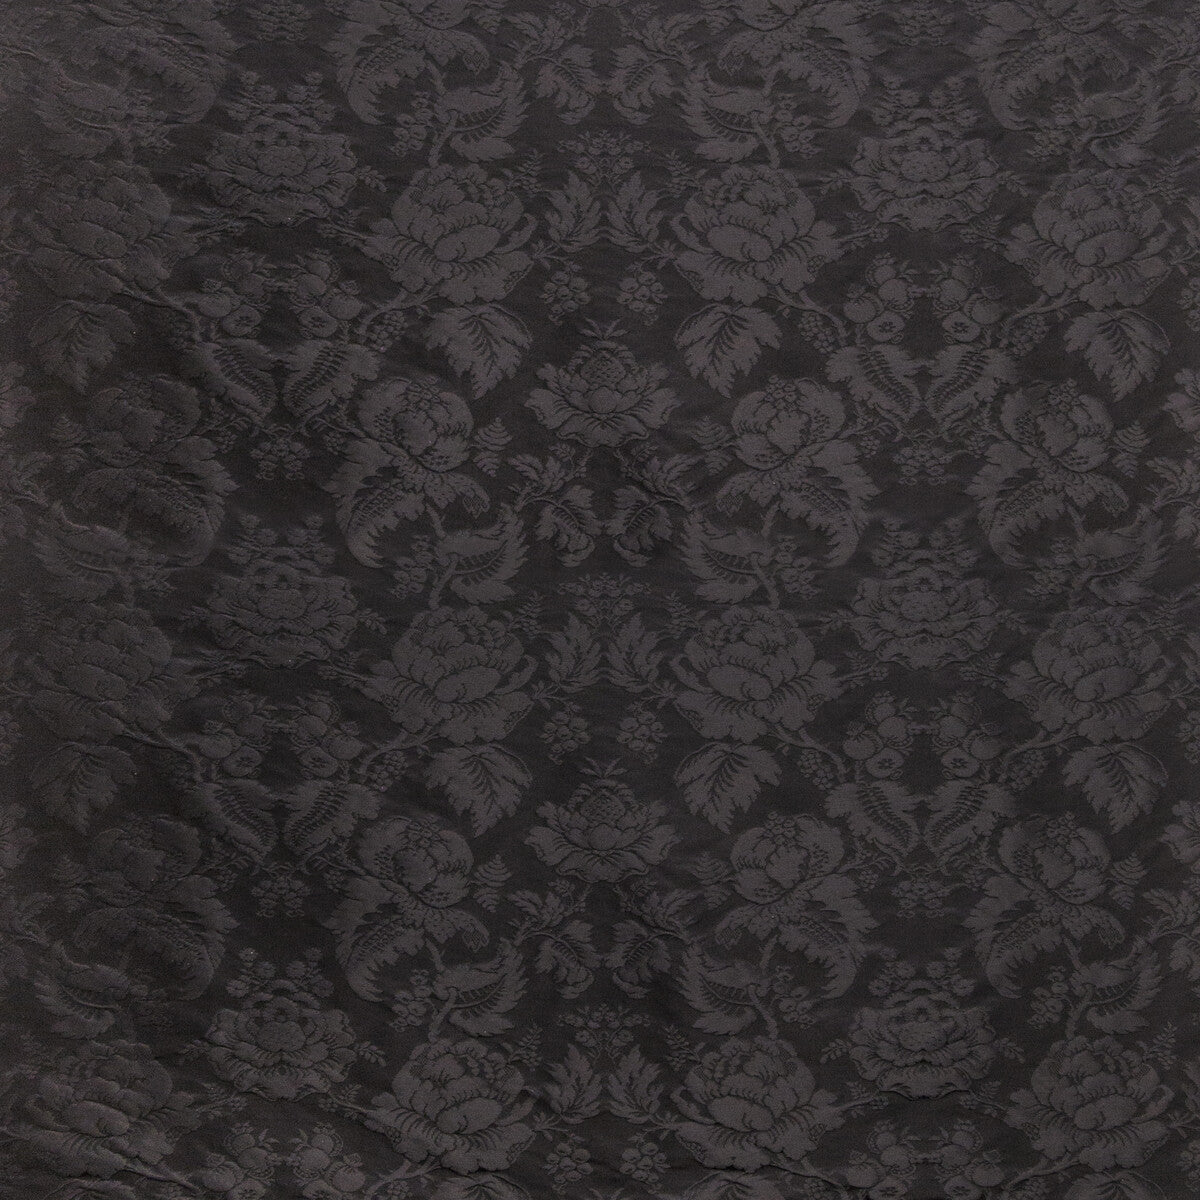 Moulins Damask fabric in onyx color - pattern BR-81035.8.0 - by Brunschwig &amp; Fils